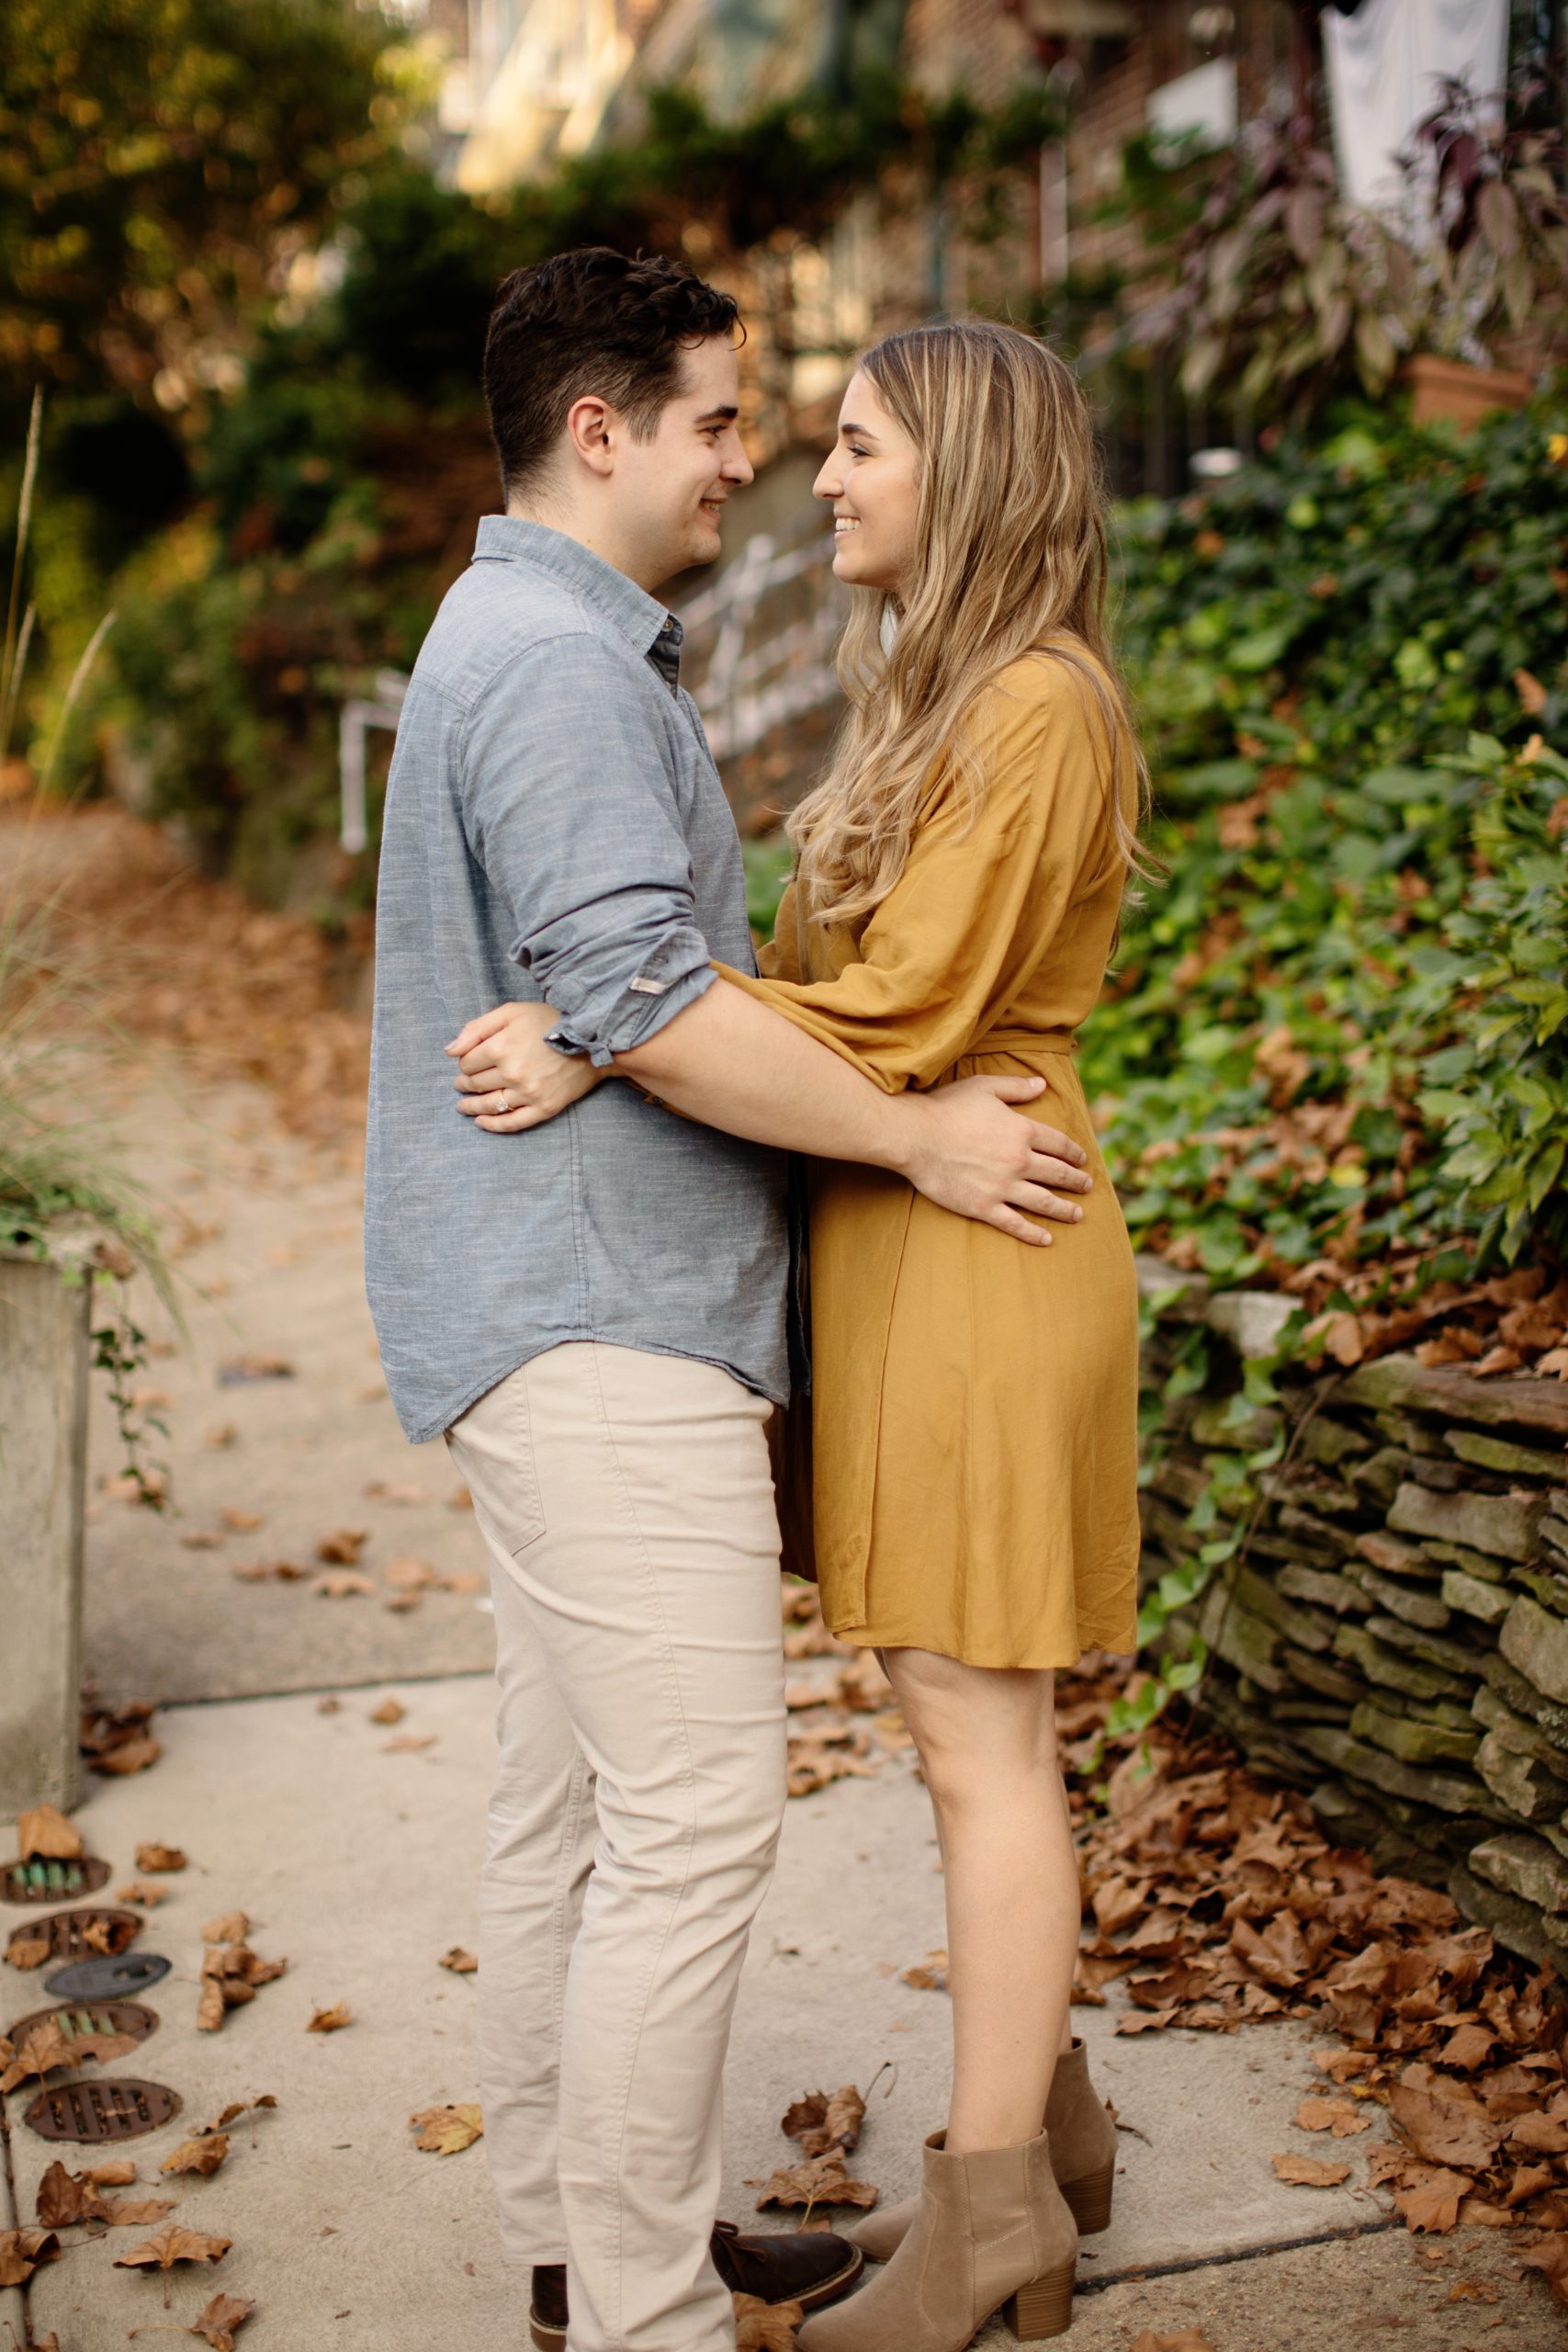 East Falls Philadelphia Engagement Photo Session Couple strolling through their neighbor in very authentic and romantic fall engagement photos. A woman wearing a wrapped mustard yellow dress and the man wearing denim blue button up and khaki pants, strolling through their Philadelphia neighborhood with their puppy.